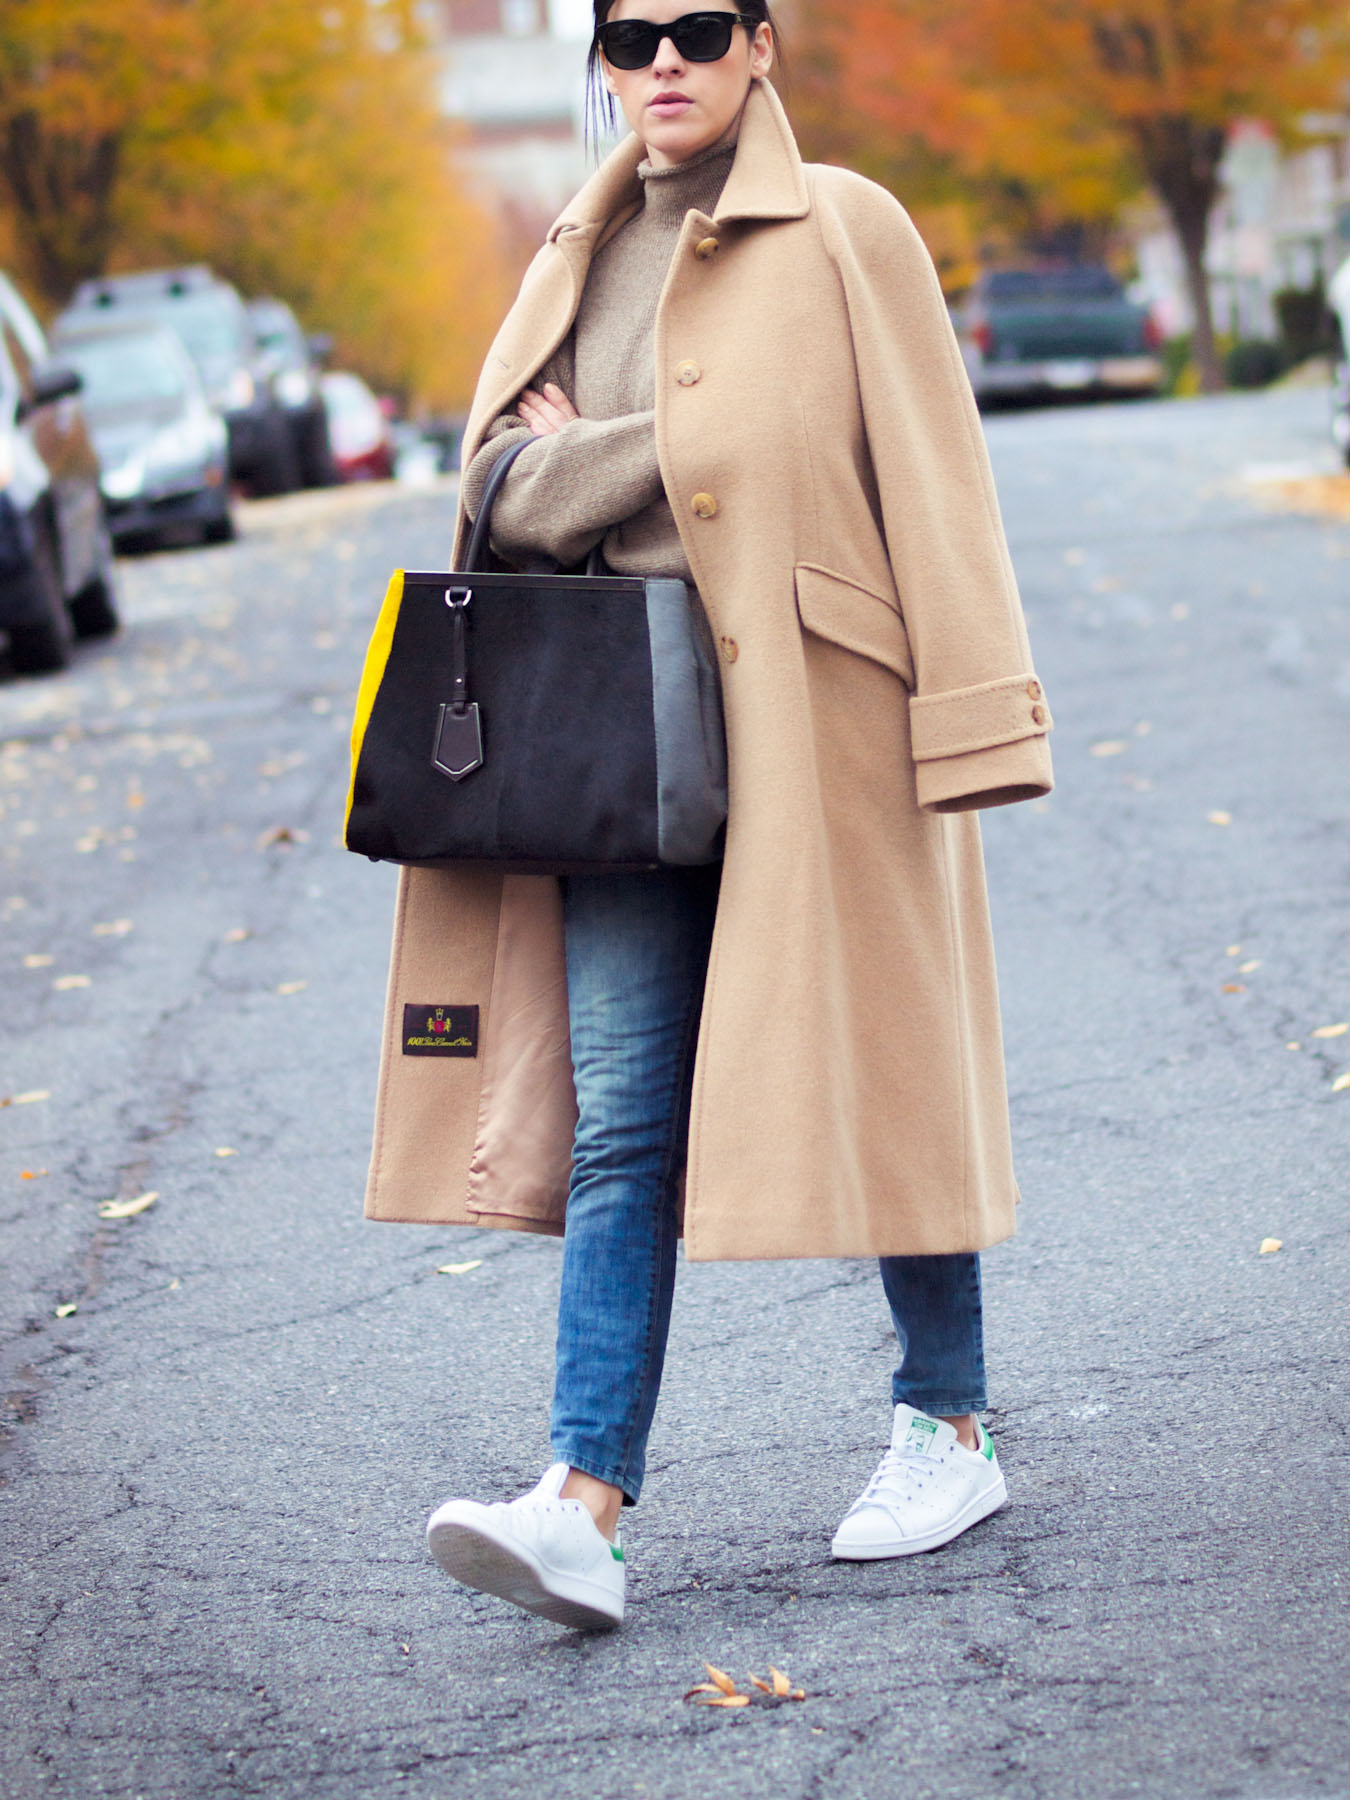 bittersweet colours, fall, fall coats, fall street style, street style, maternity style, 23 weeks, bump style, camel coat, turtleneck, stan smith adidas, sneakers trend, 2jours bicolor fendi bag, fendi bag, casual loook, 